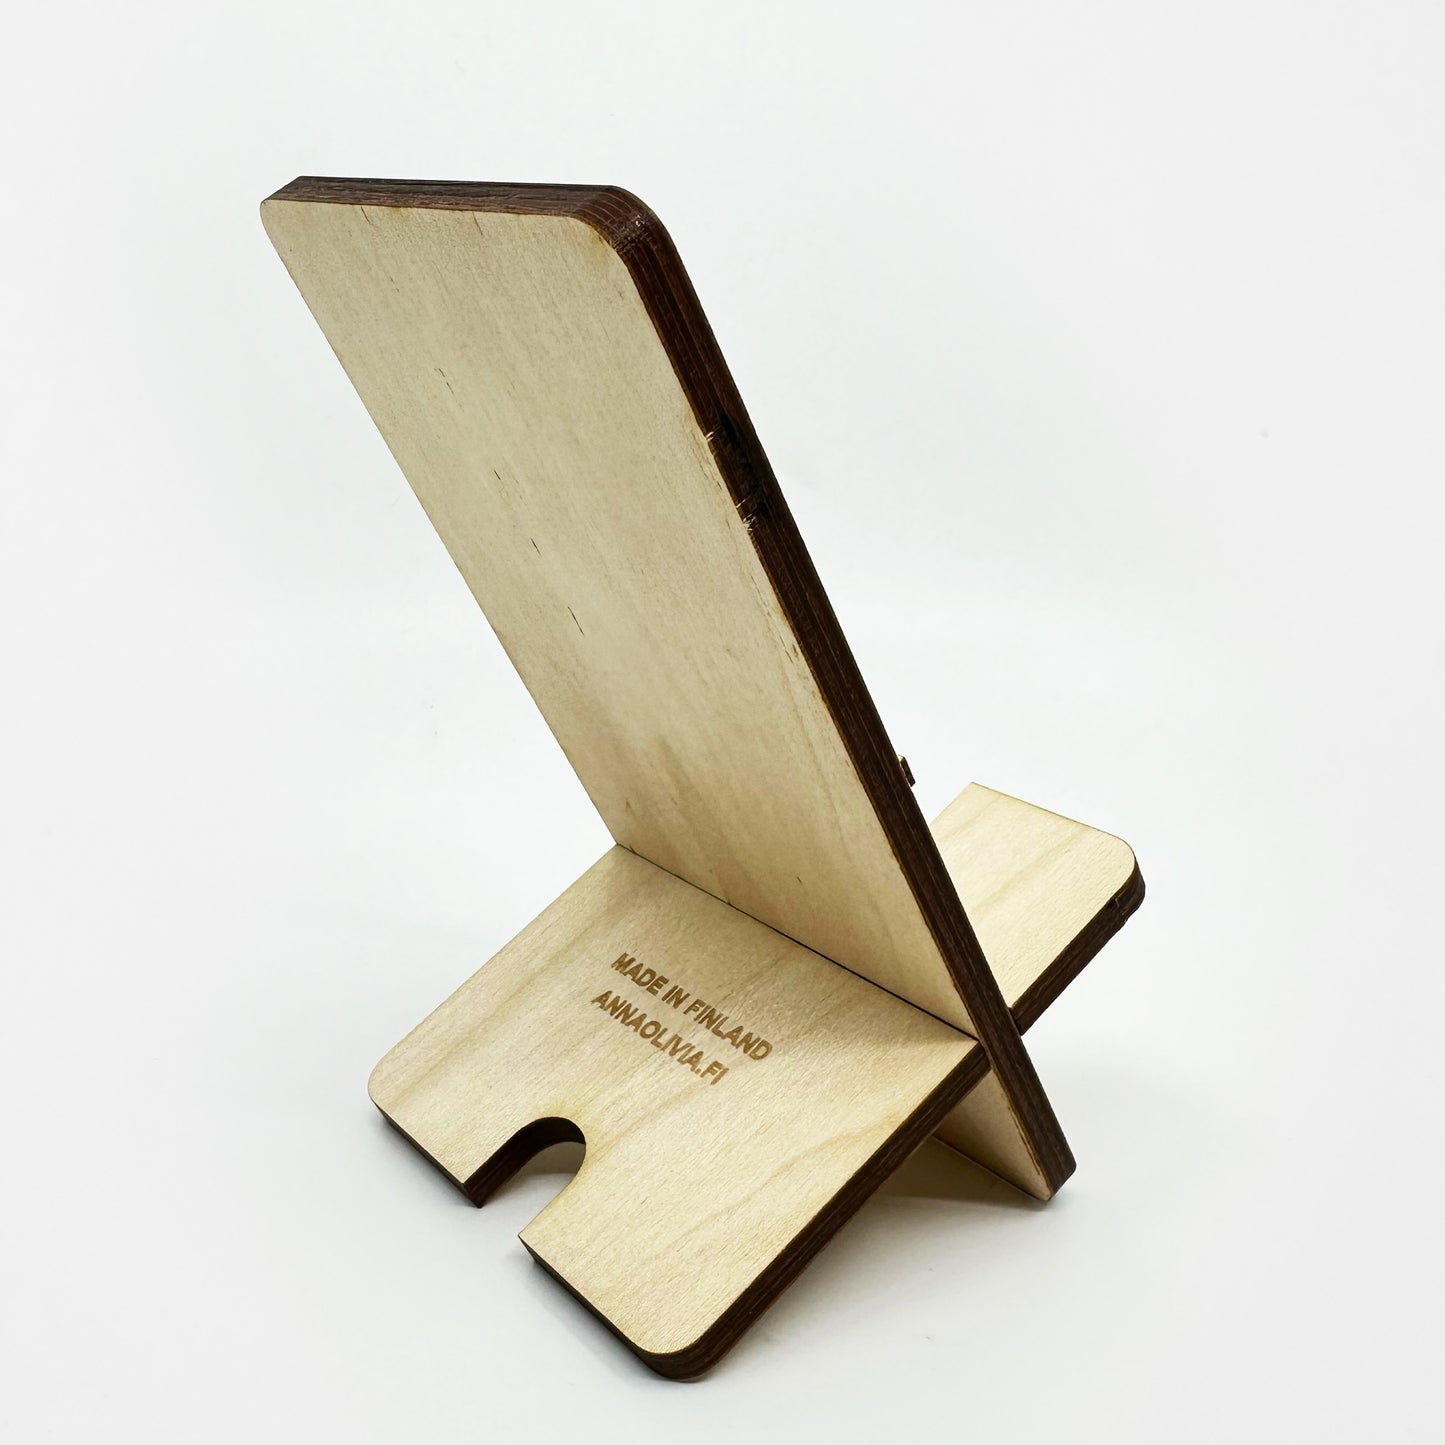 iPhone stand